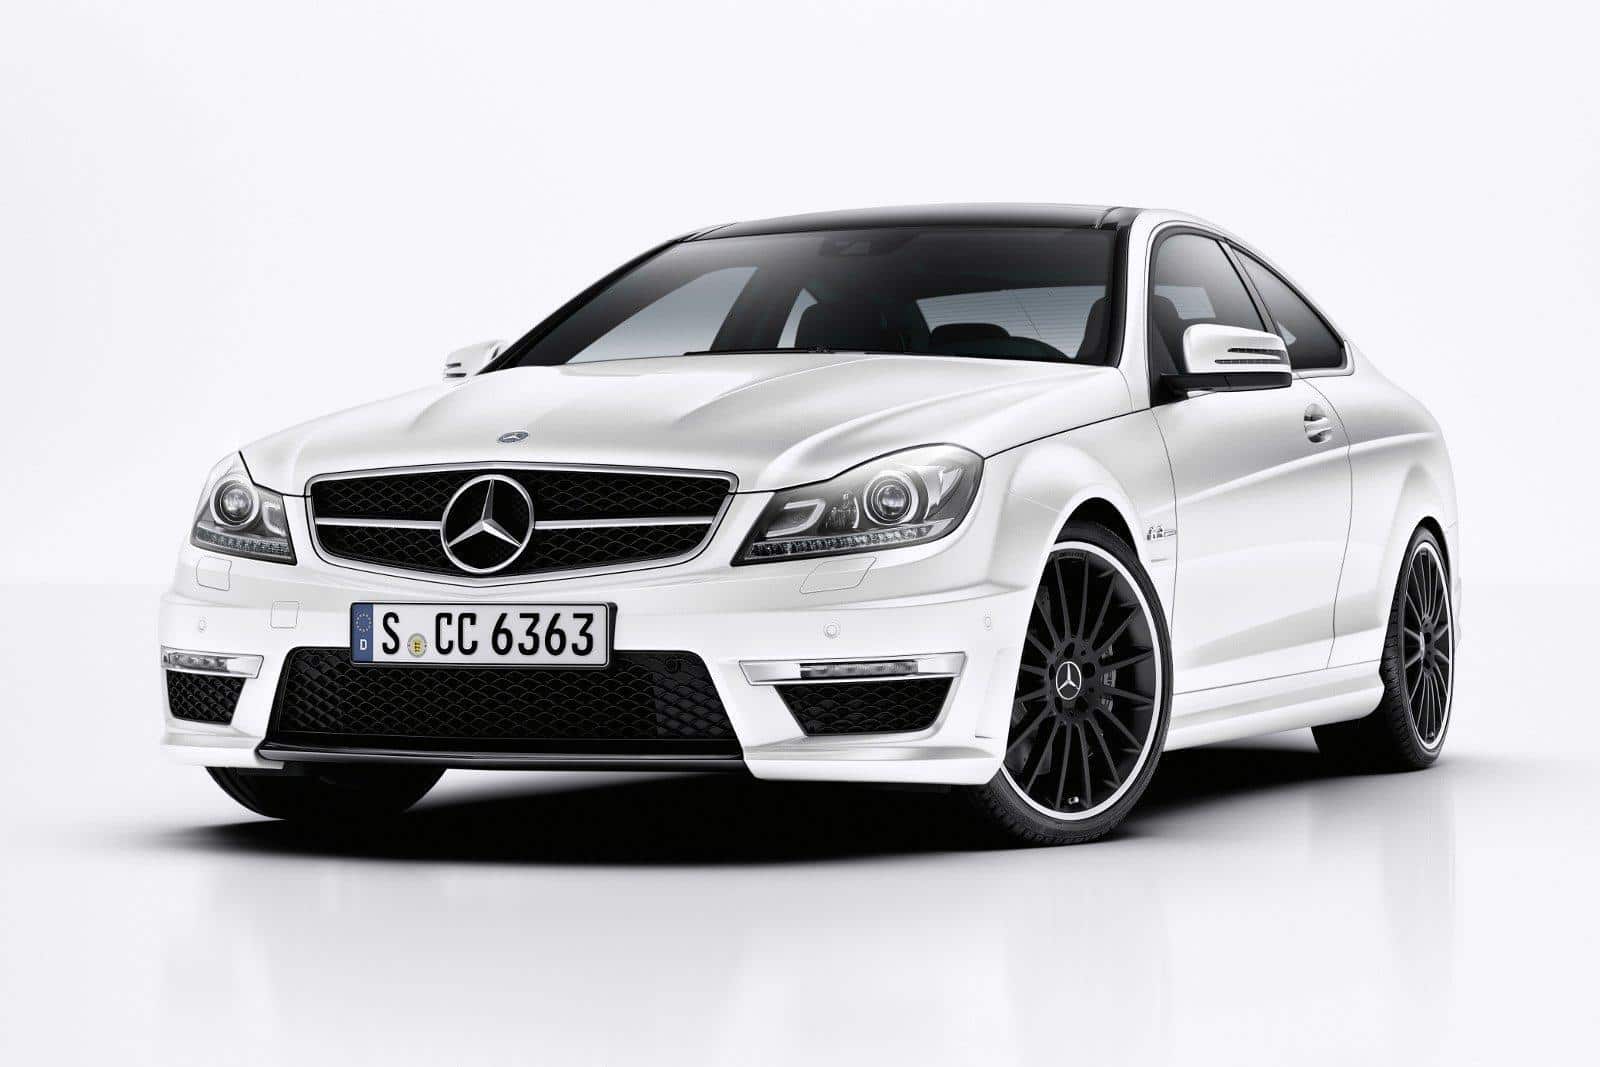 Mercedes unveils the new C63 AMG Coupe